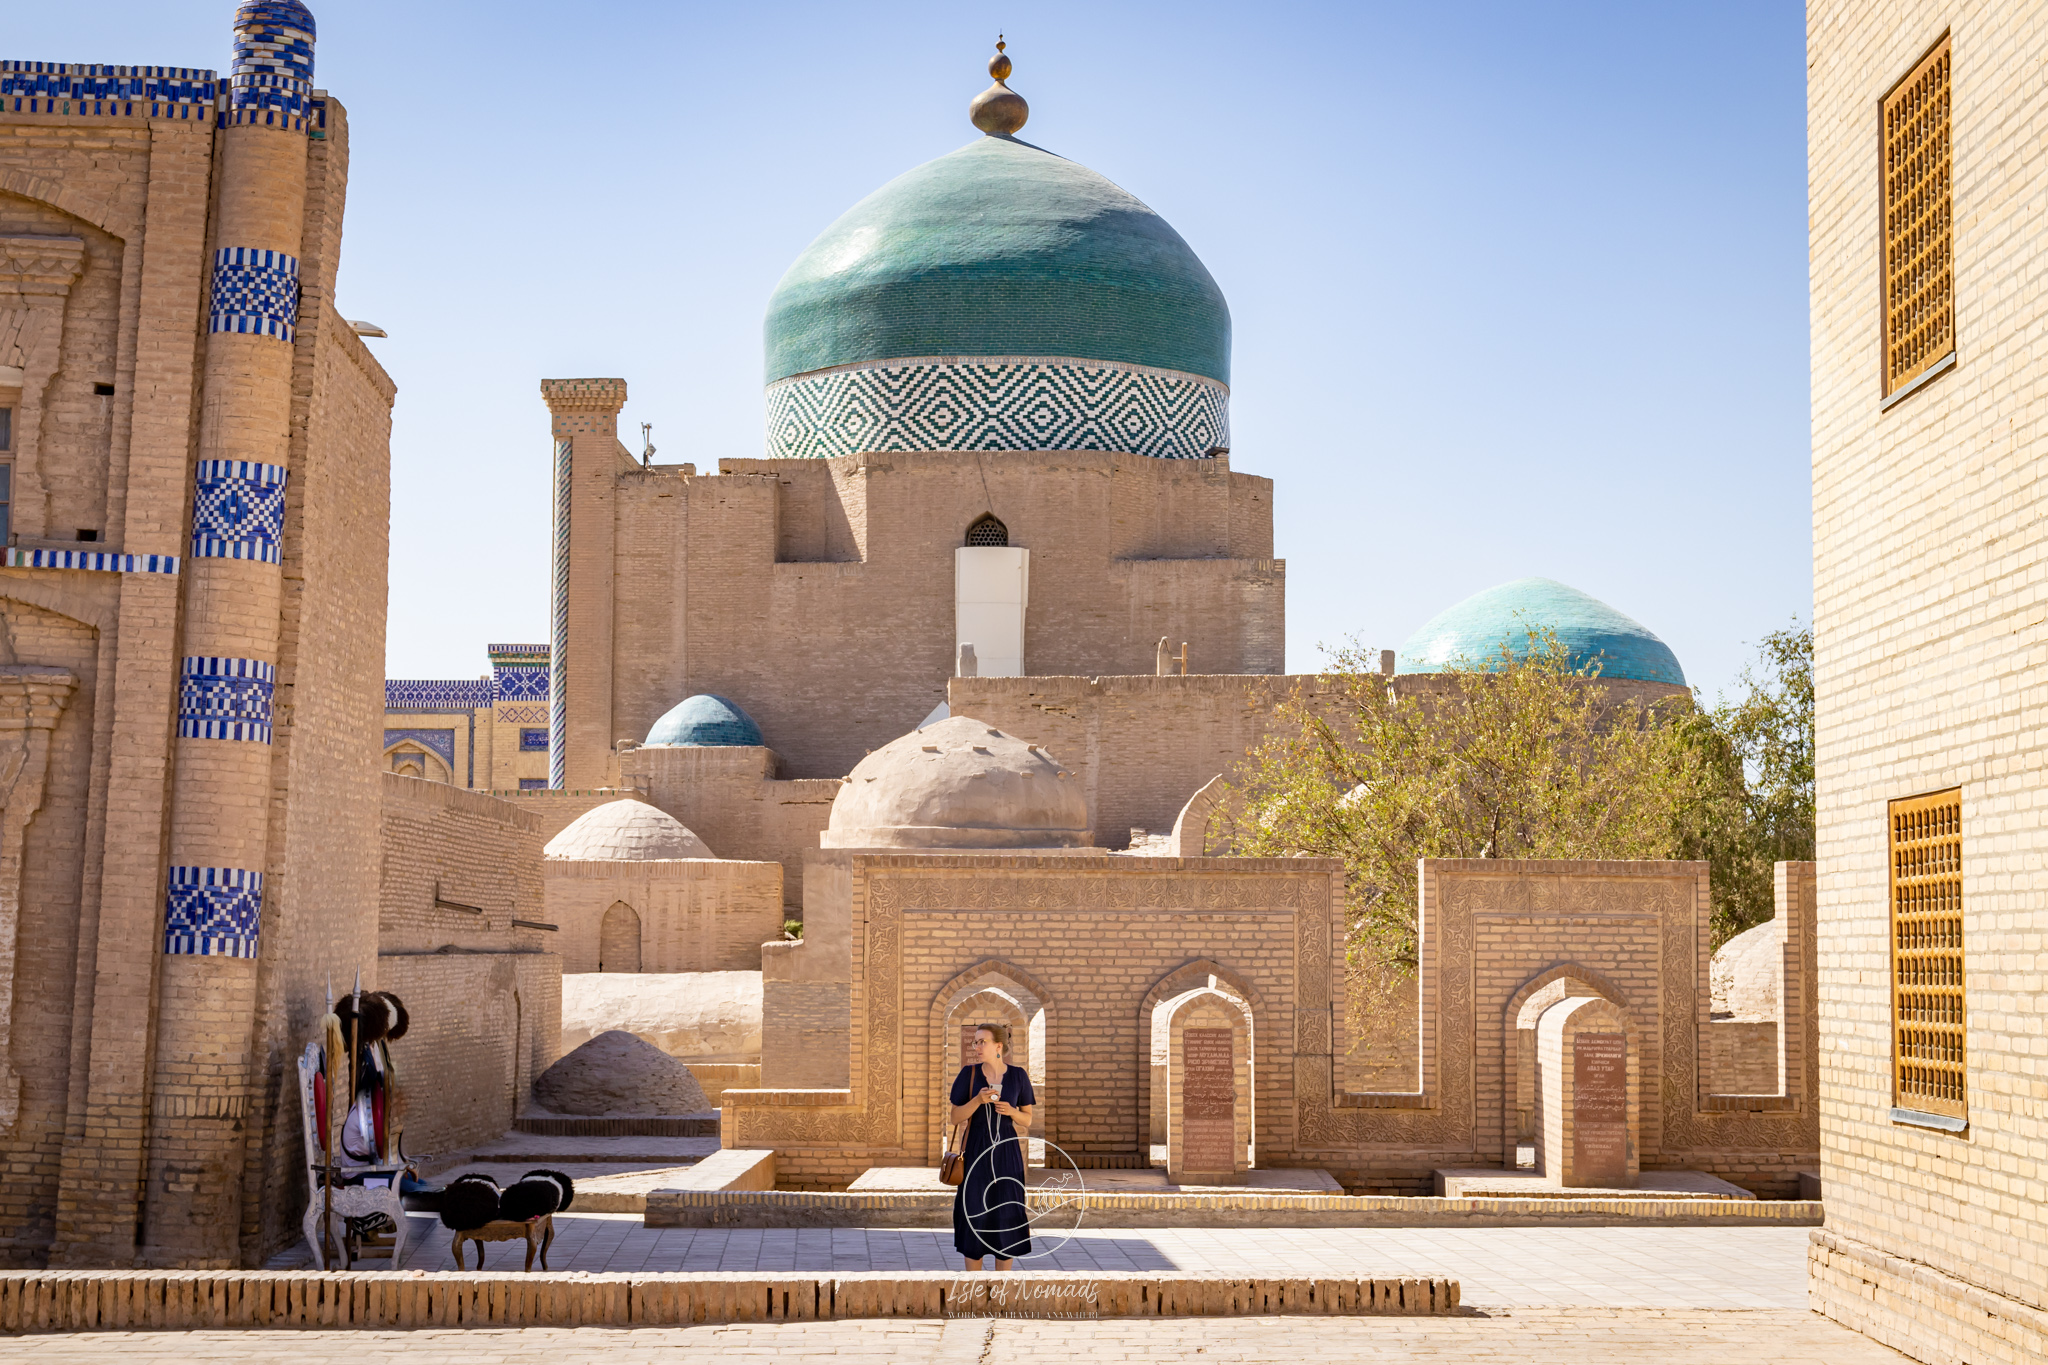 Khiva is a small city, but you can spend hours just wandering the beautiful old town